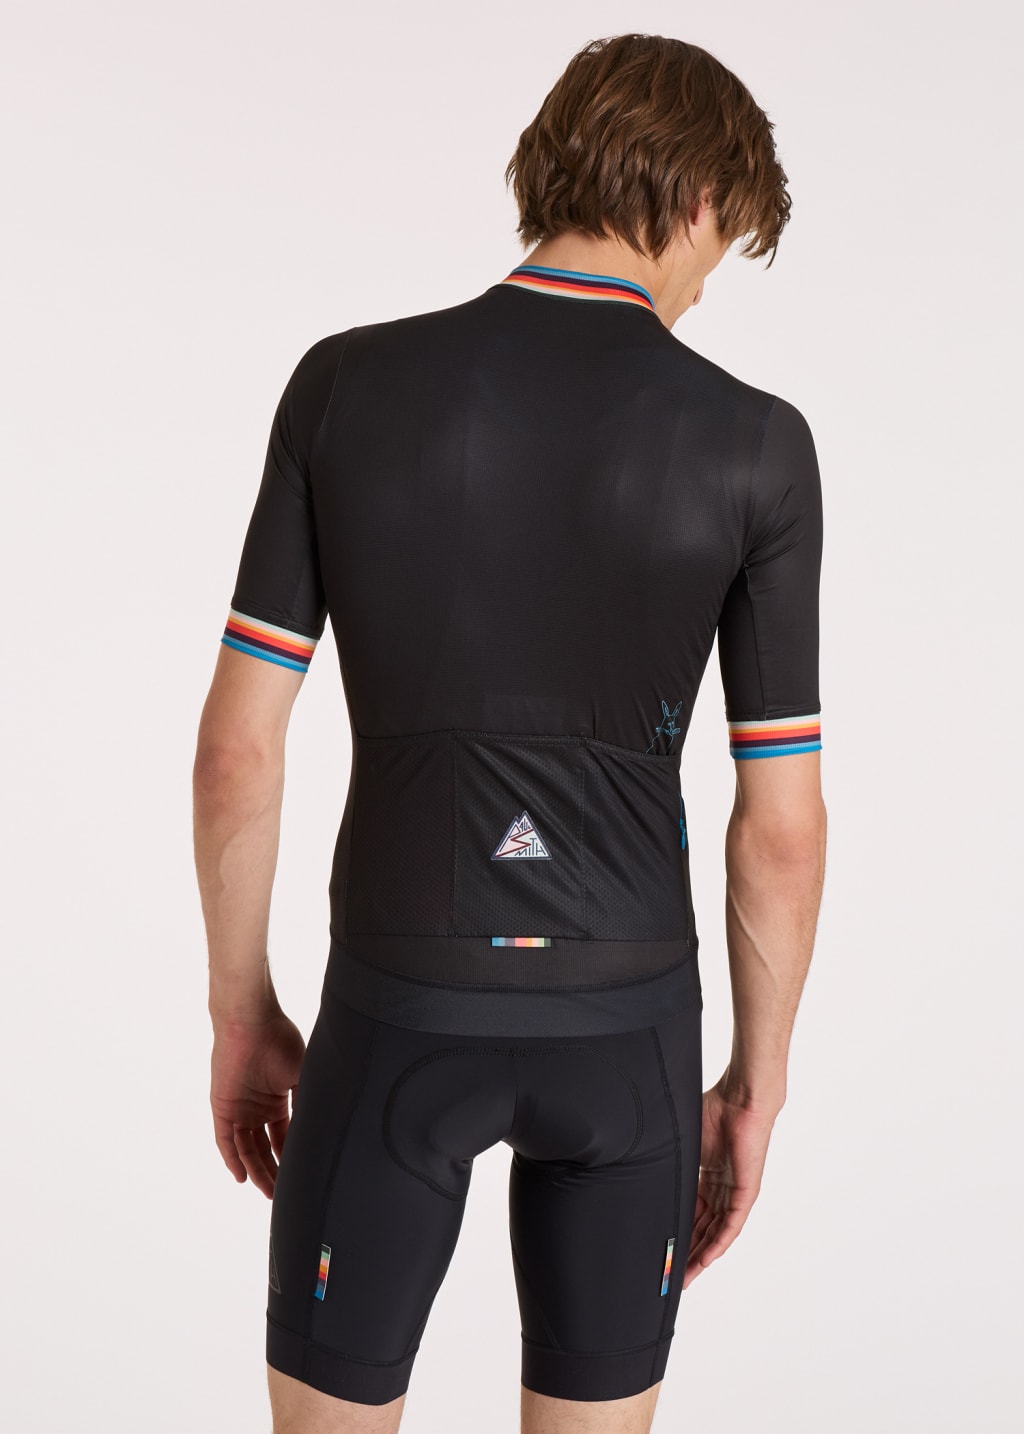 Model View - Men's Black Race Fit Cycling Jersey With 'Artist Stripe' Trims by Paul Smith